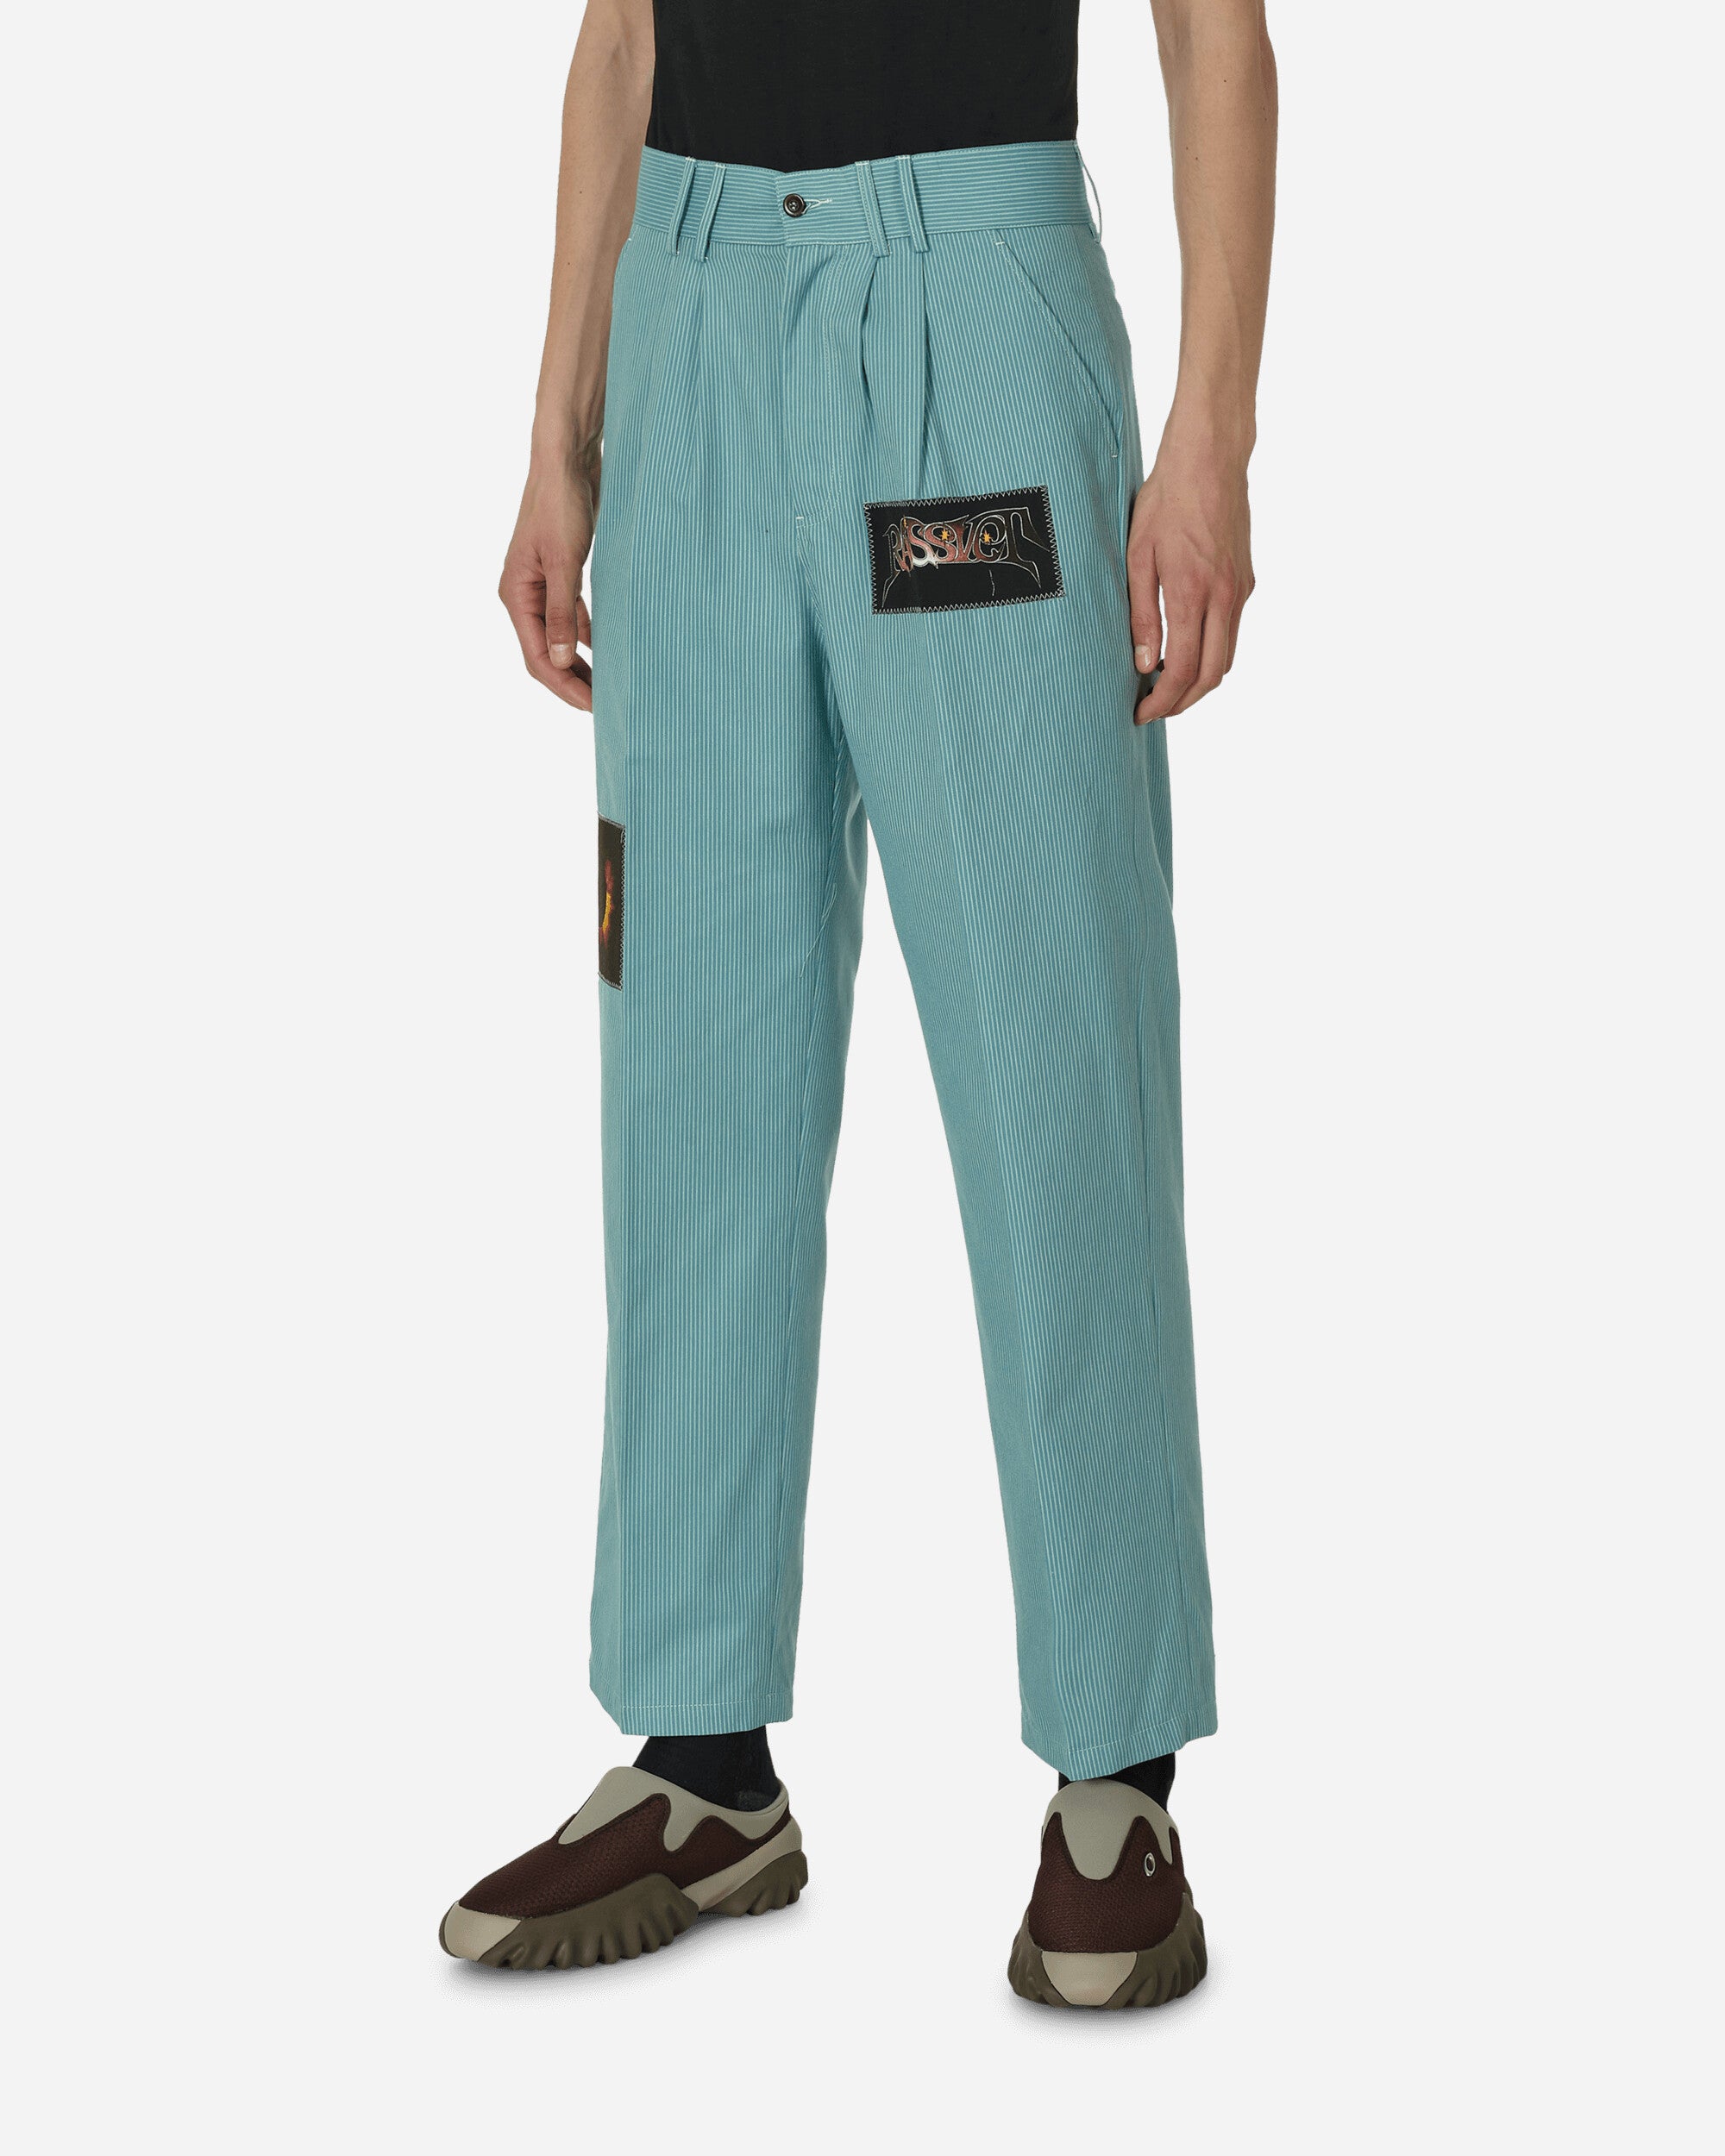 Paccbet Men Space Trousers Woven Teal Pants Trousers PACC12P006 2